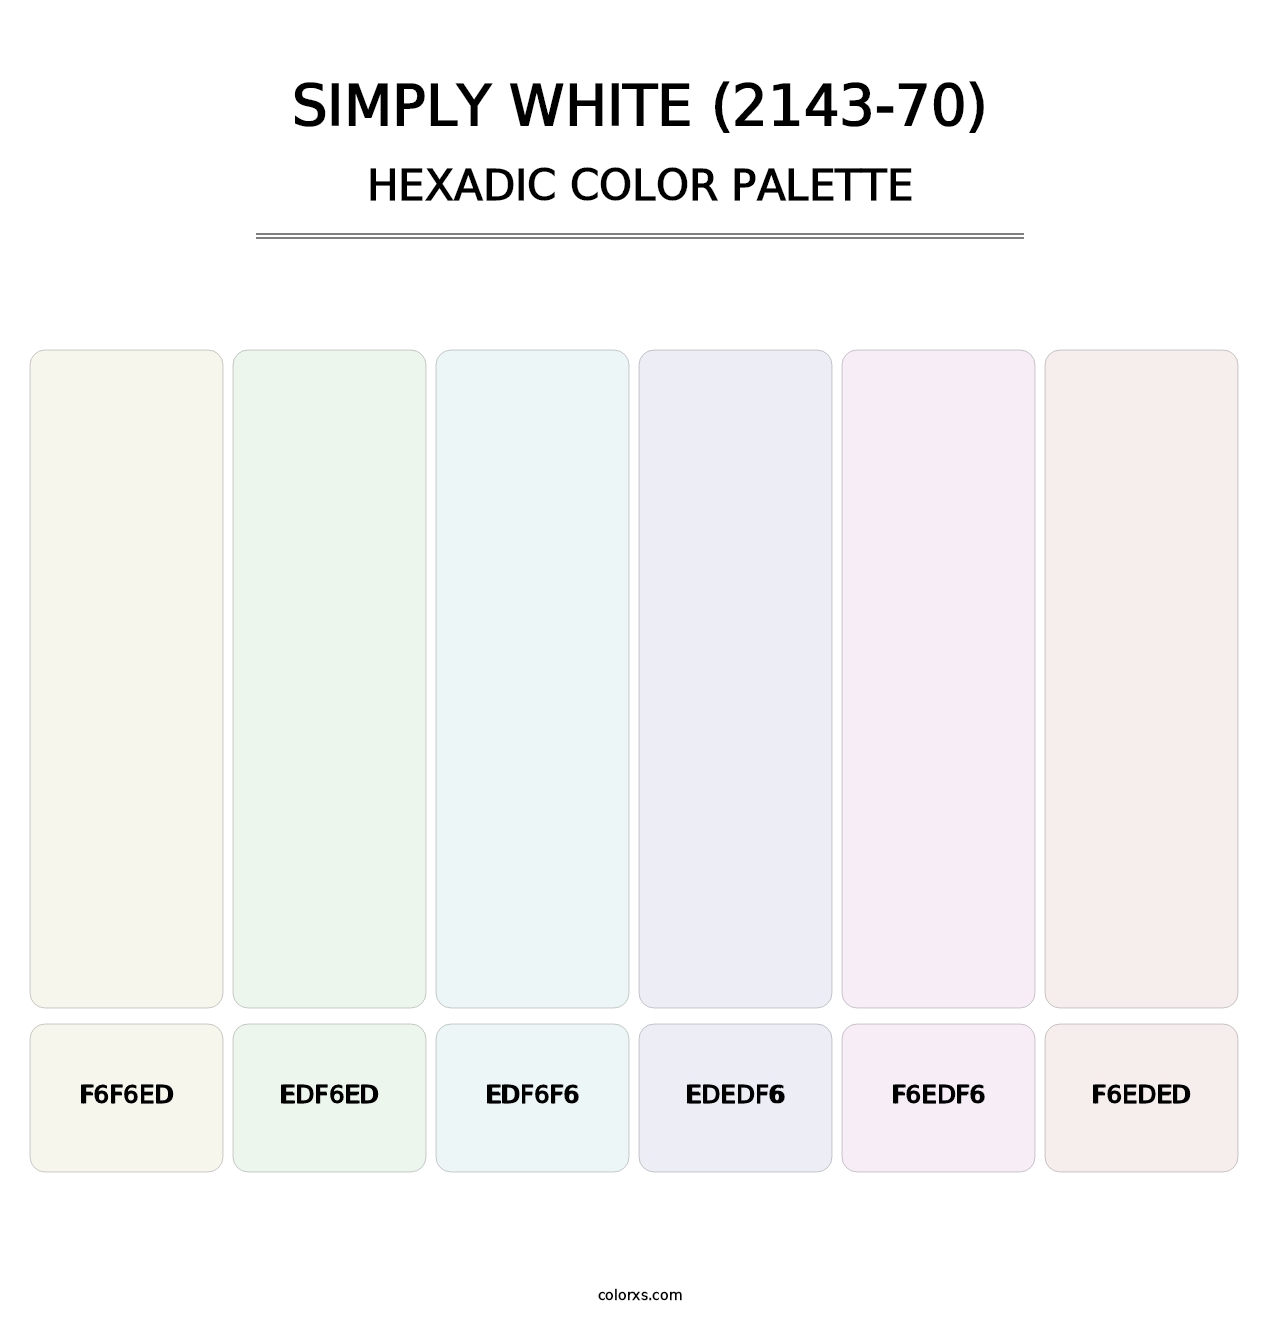 Simply White (2143-70) - Hexadic Color Palette